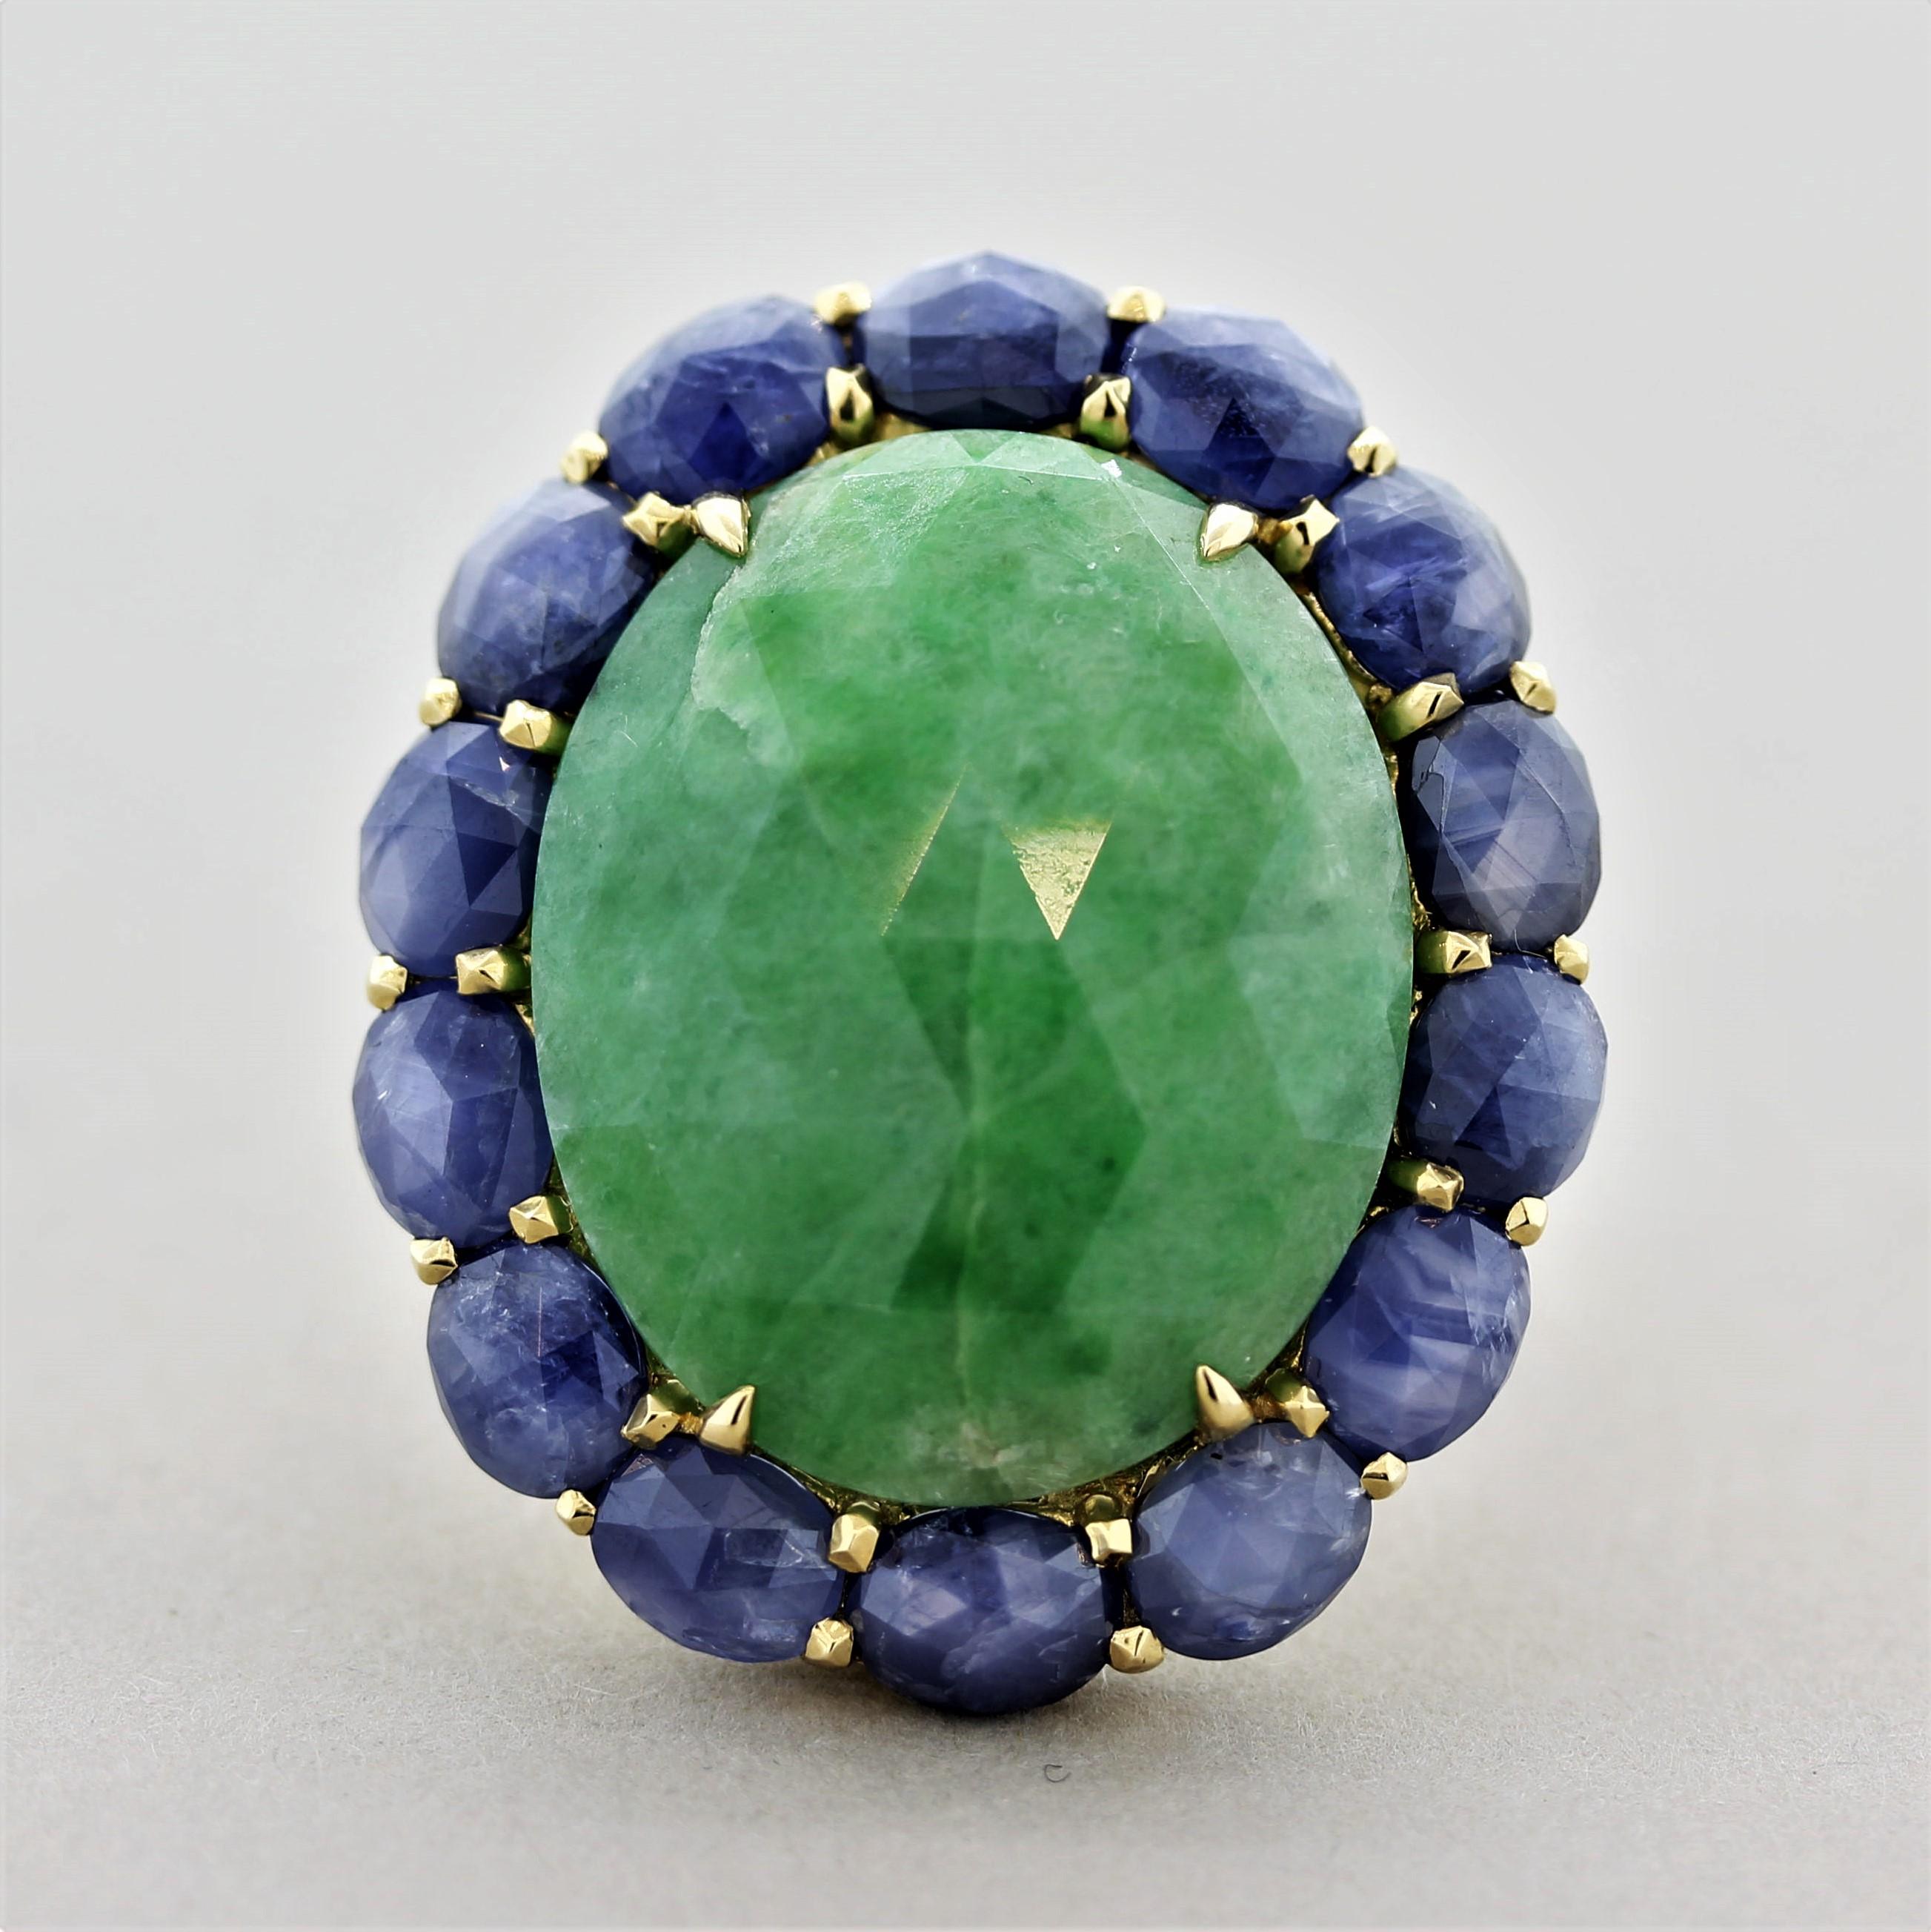 A large and impressive ring featuring a 28.25 carat jade with a unique rose-cut on its top. It is accented by 10.89 carats  of blue sapphires which are set around the jade and are also rose-cut. Made in 18k yellow gold and ready to be worn! 
Ring